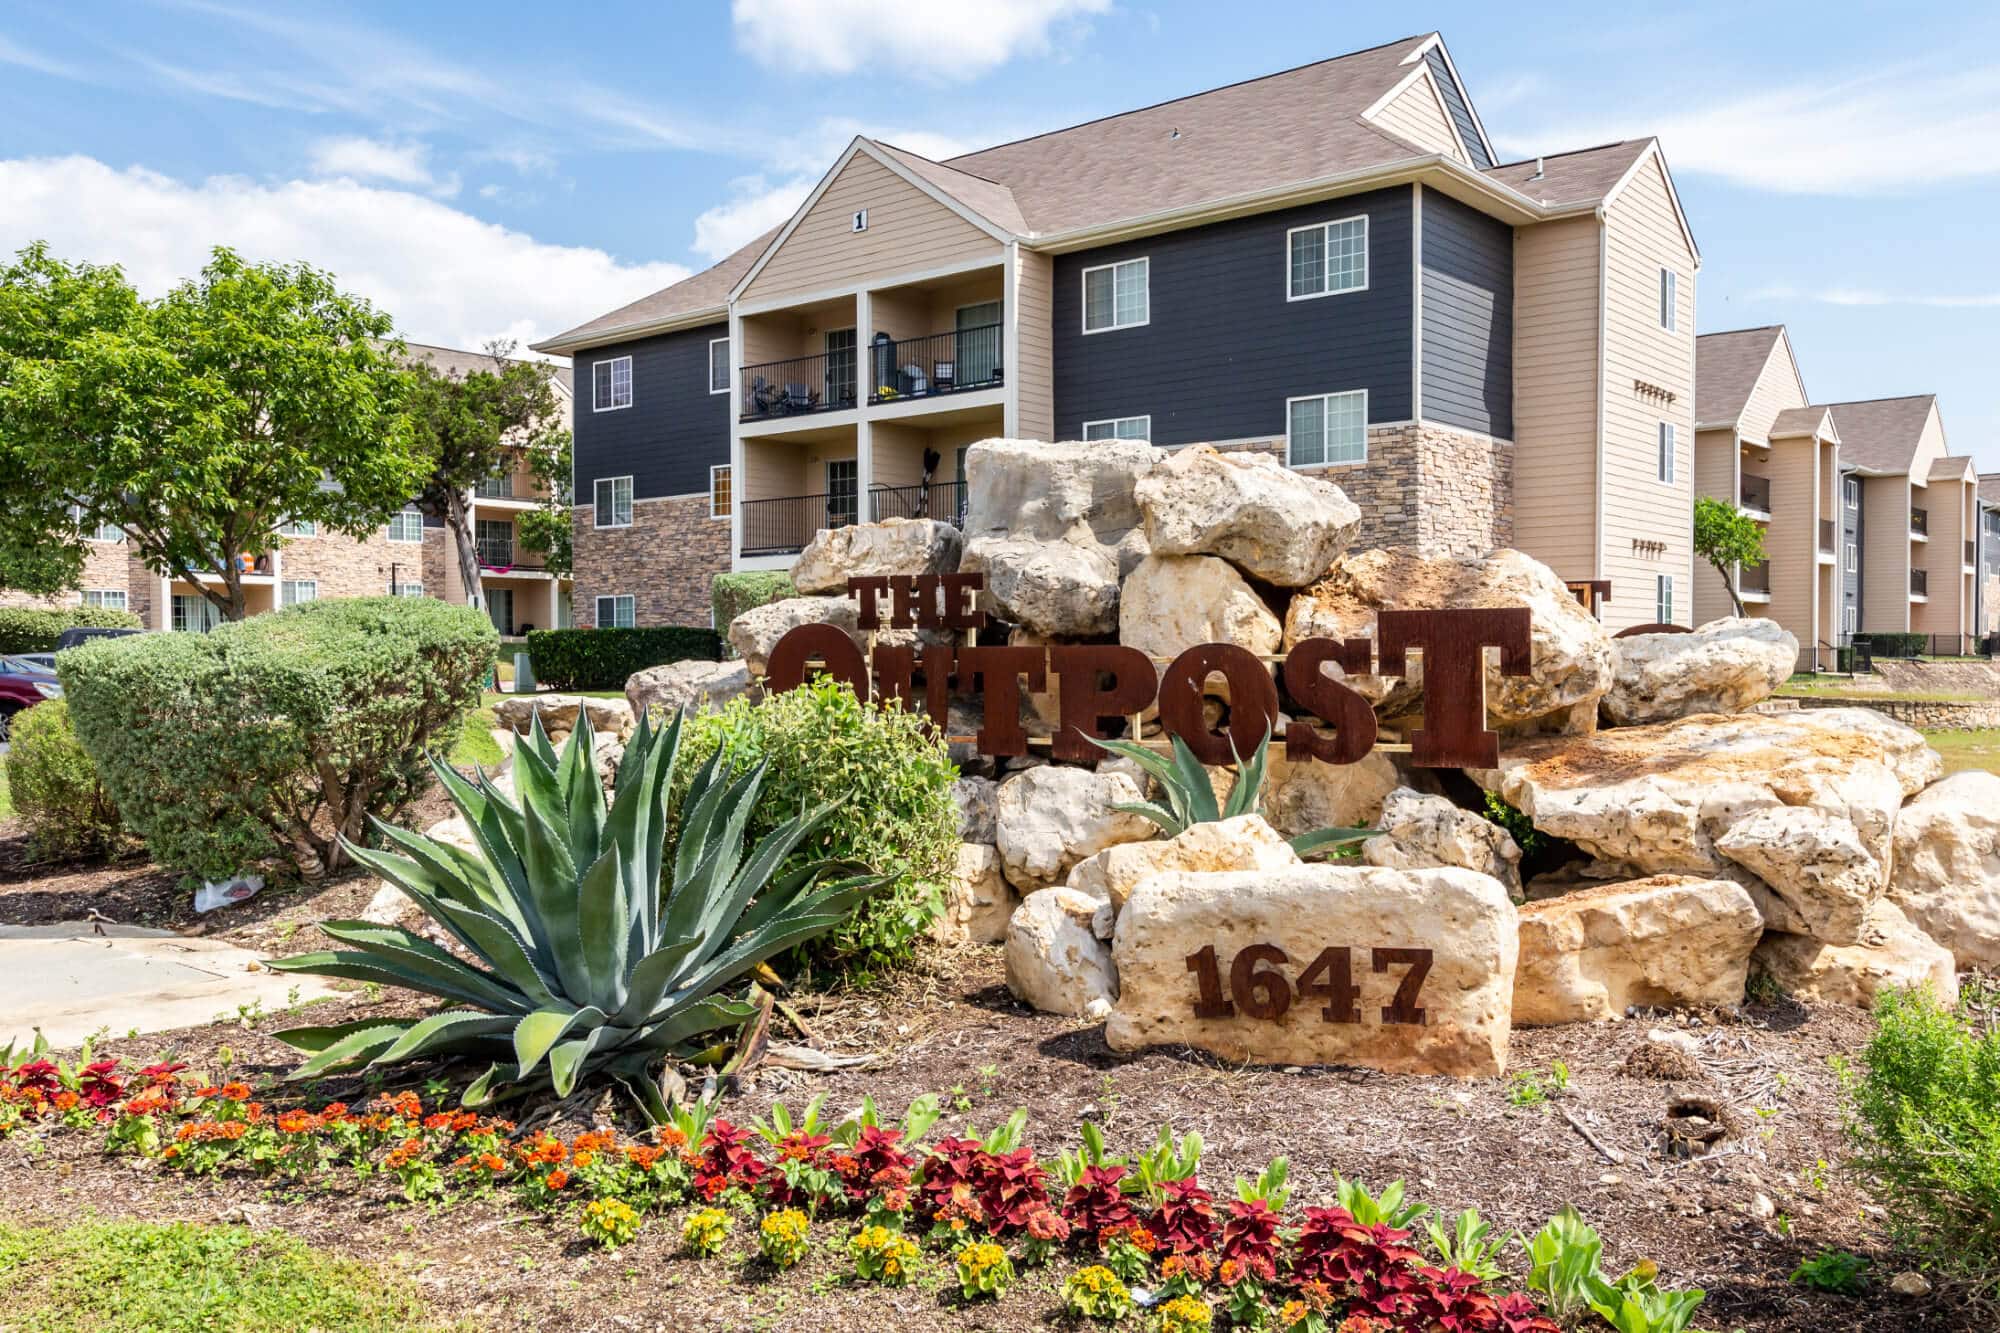 the outpost san marcos off campus apartments near texas state university monument sign with cactus and rock landscaping building exterior